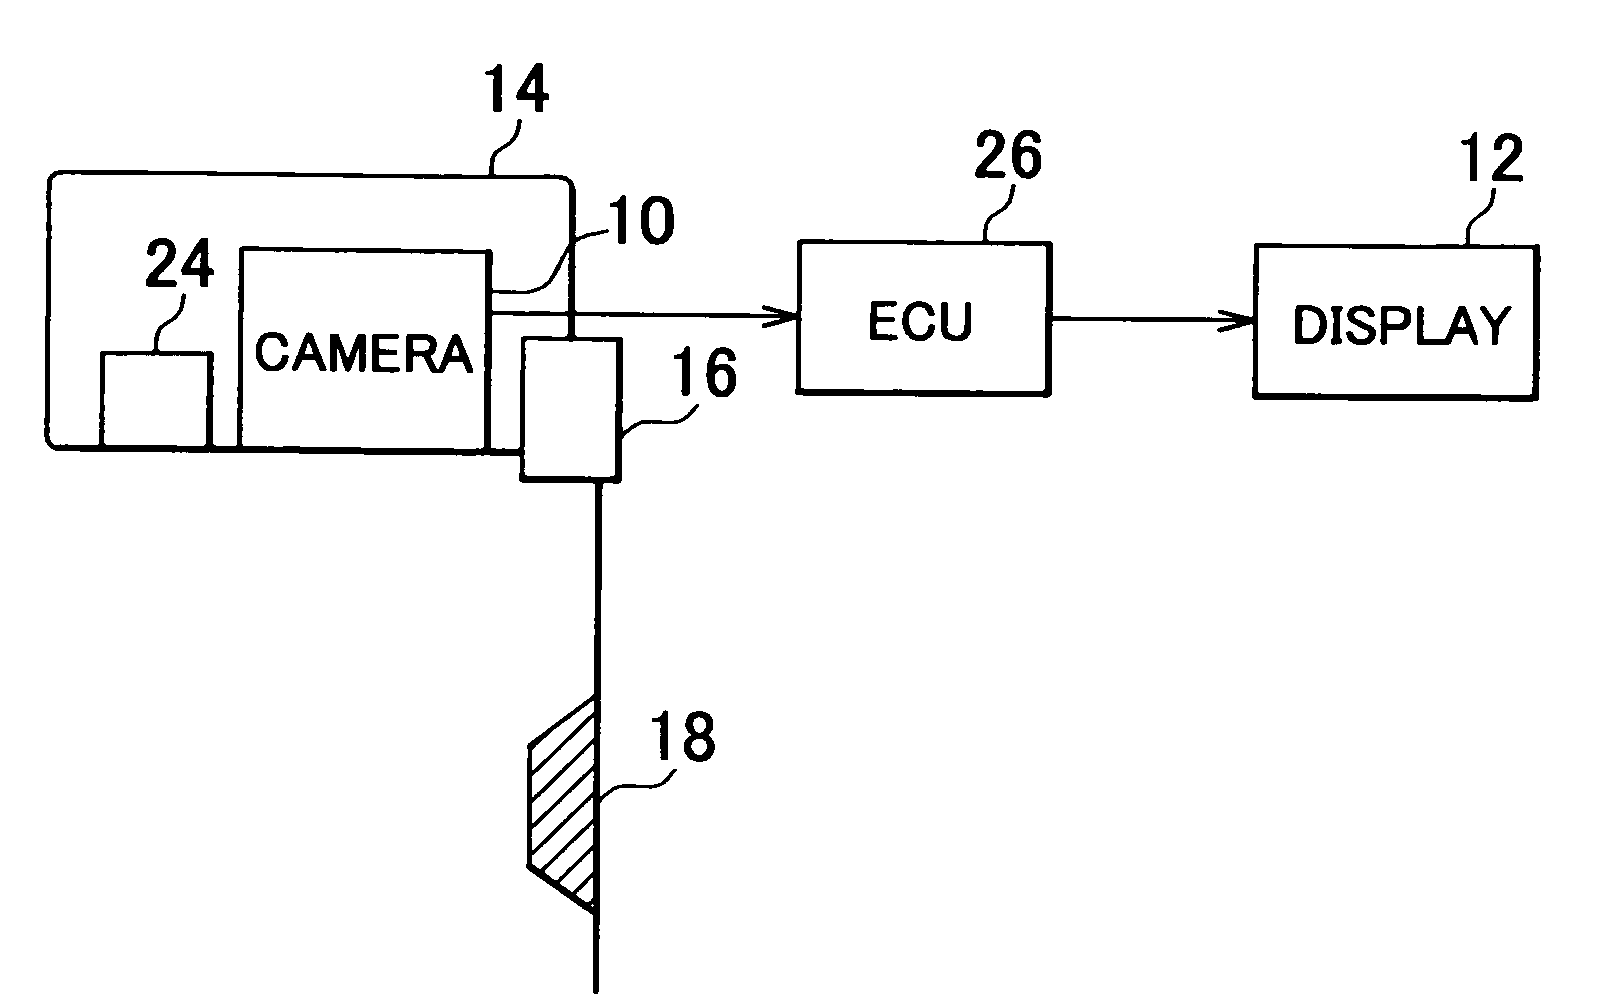 Turn signal lamp, periphery monitoring device, body construction and imaging device for vehicle